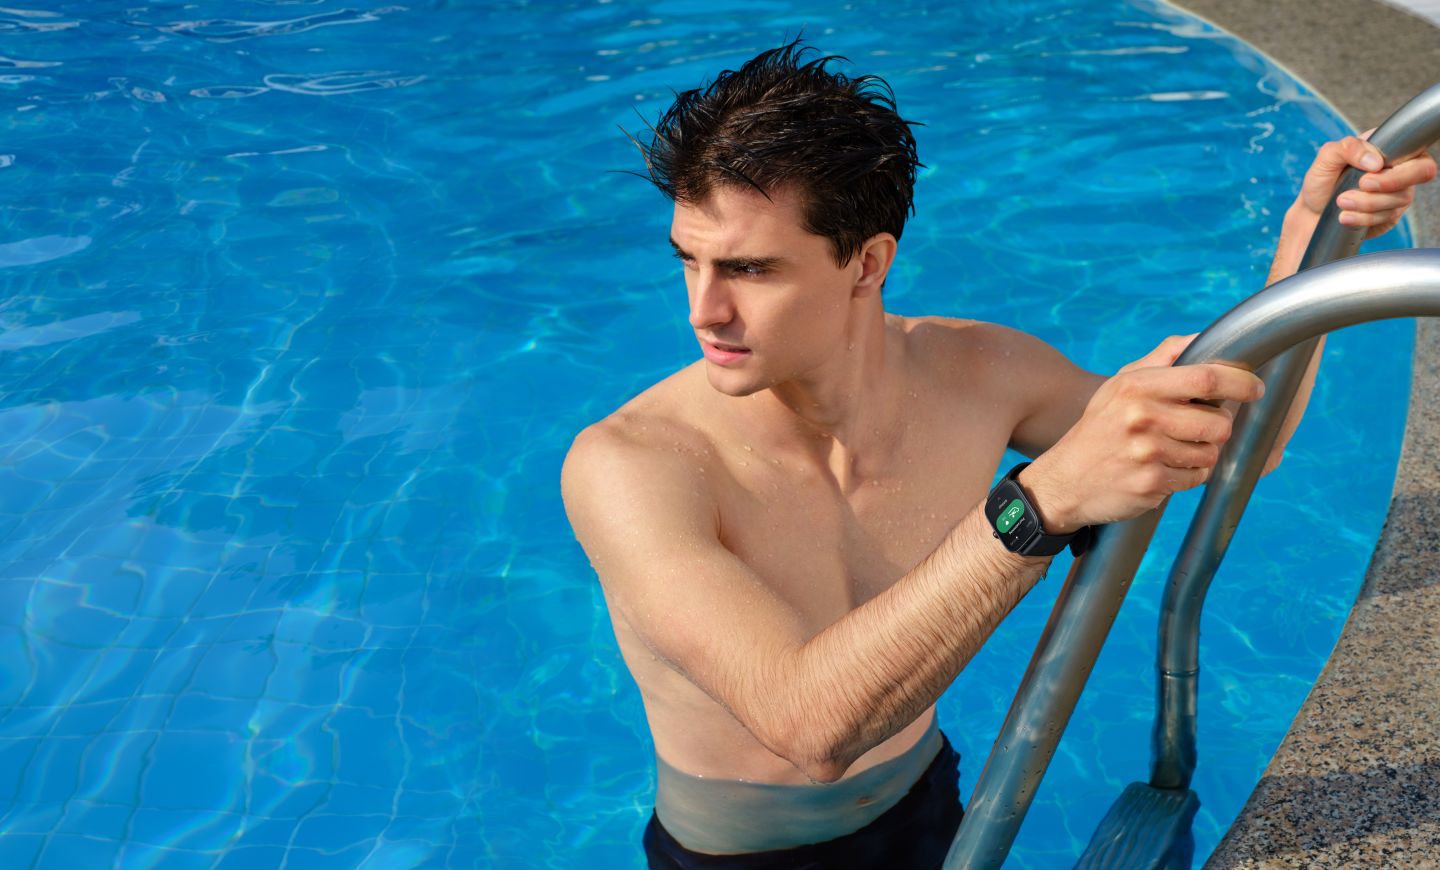 The GTS 3 monitors heart rate all day, even when swimming, and alerts the wearer when abnormalities are detected